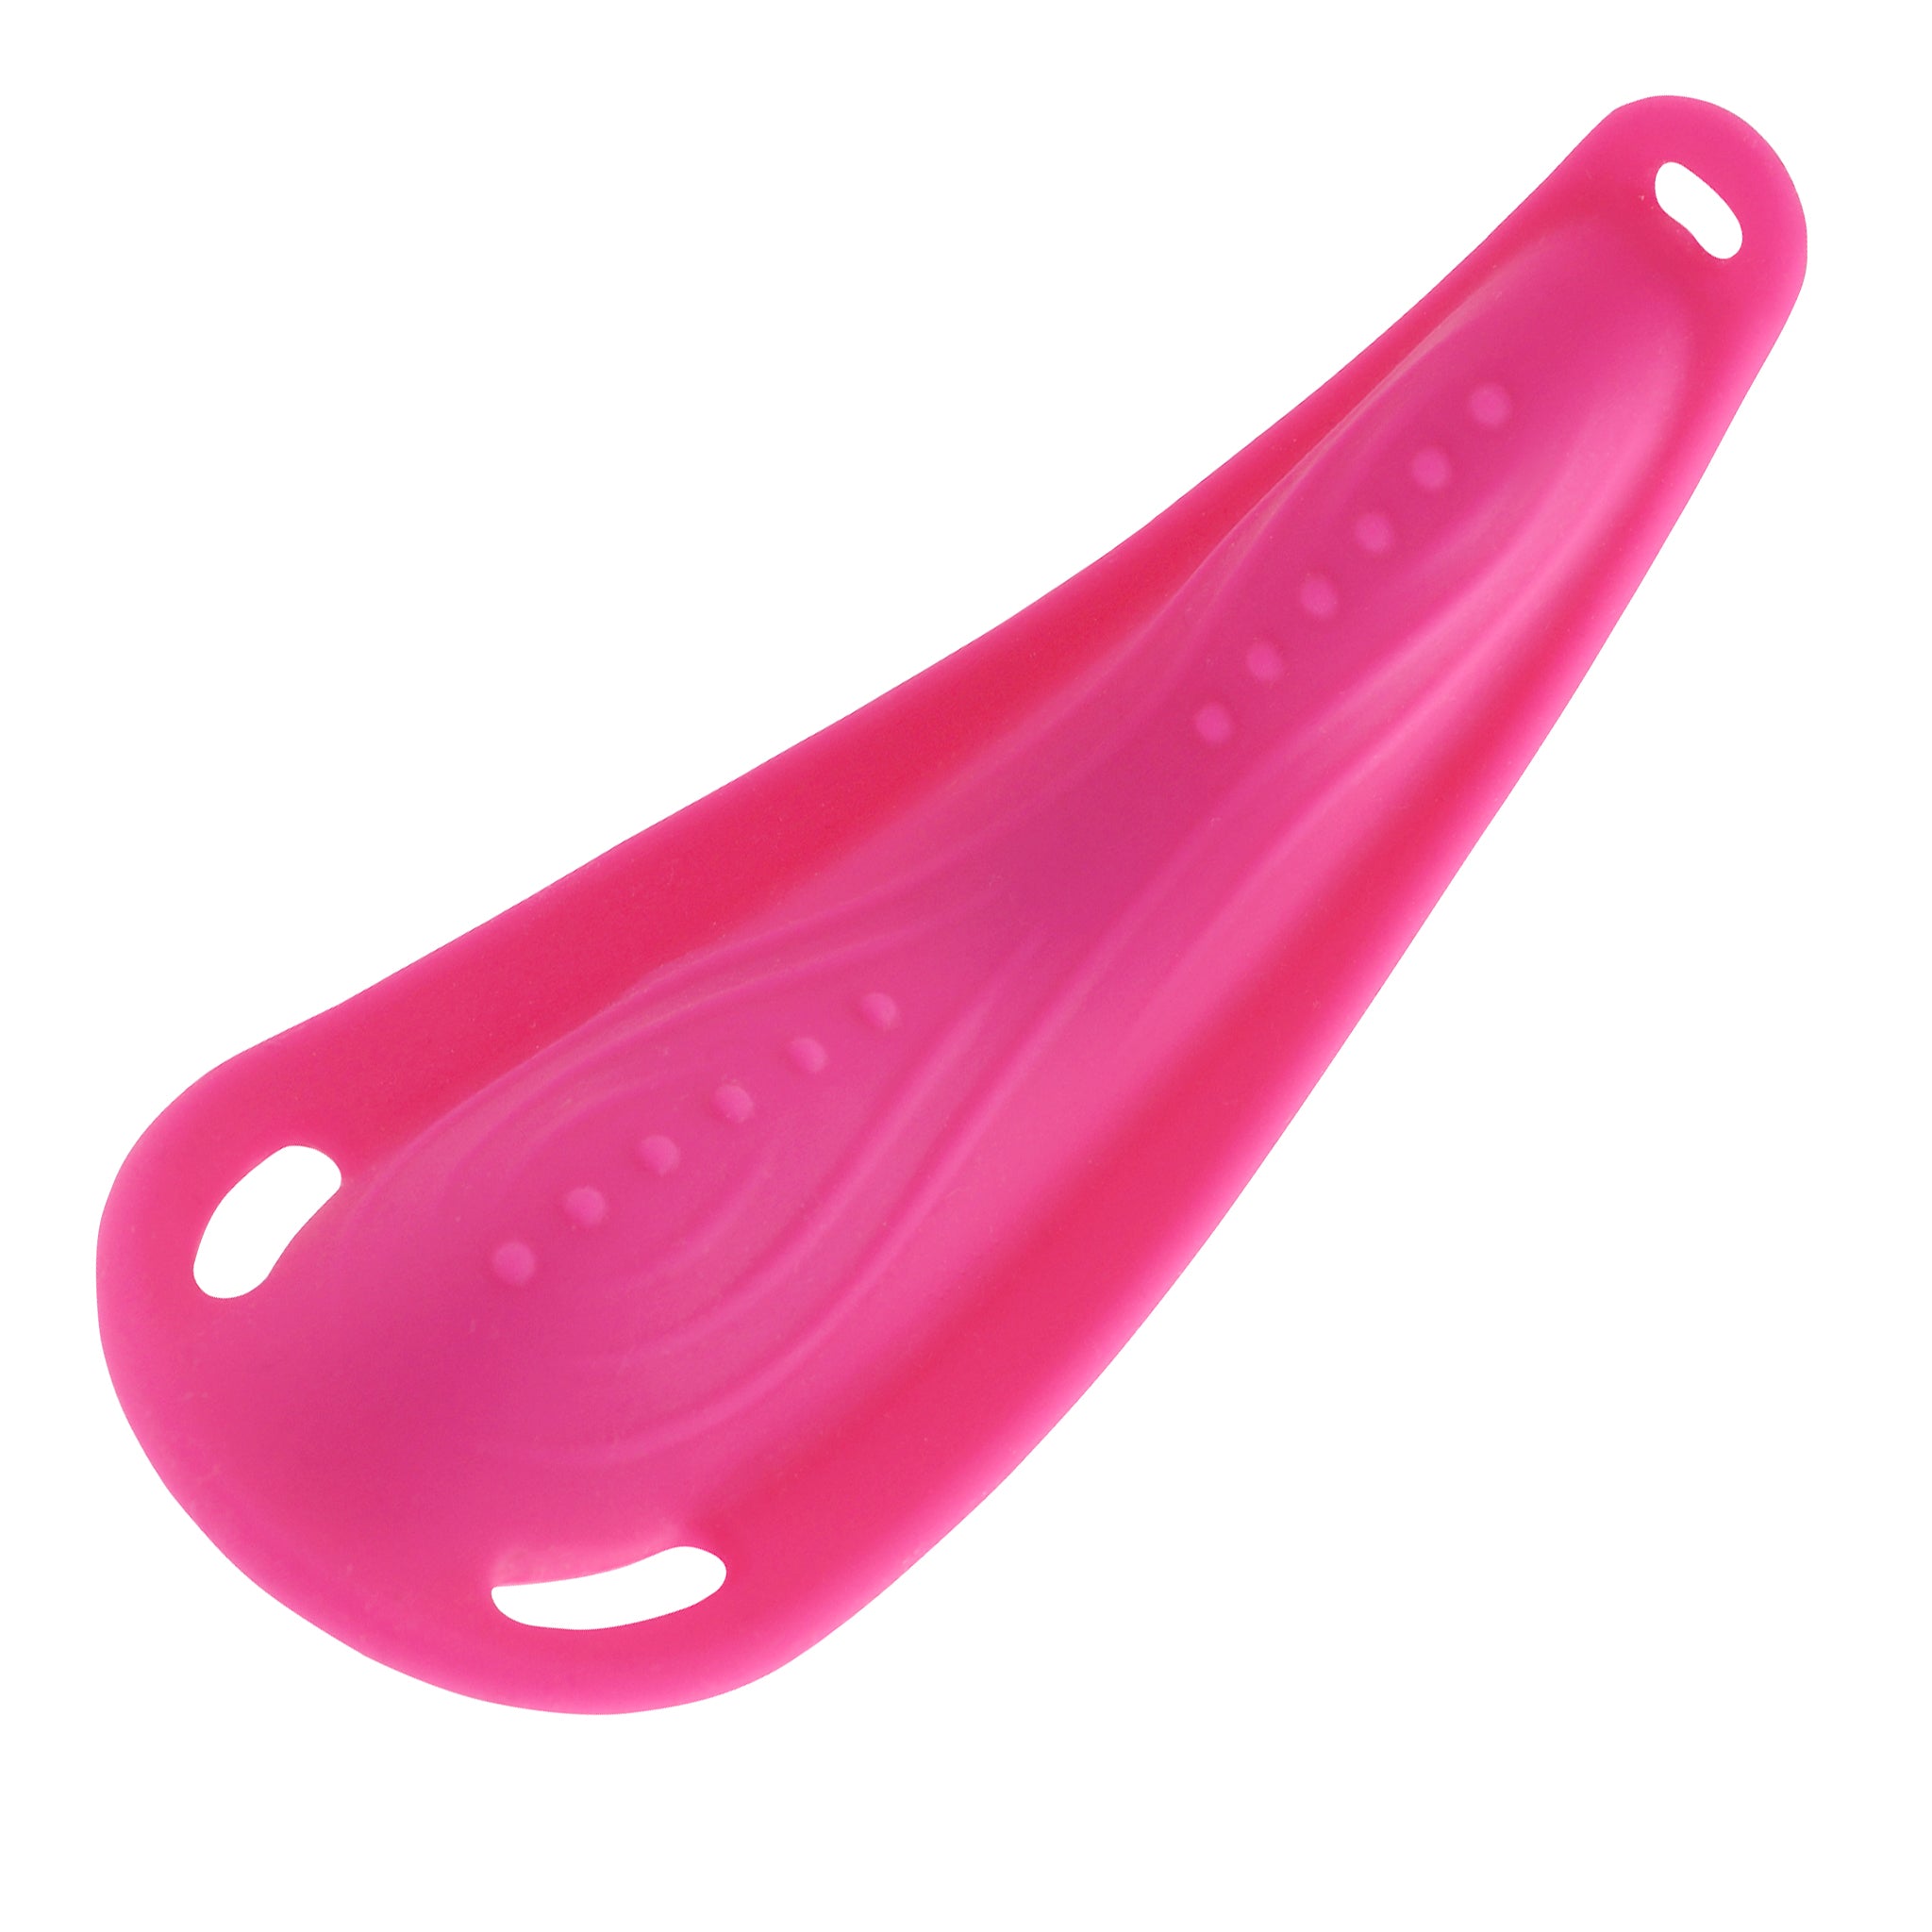 HOT PINK PANTY WEARABLE VIBE WITH LIPSTICK CONTROLLER